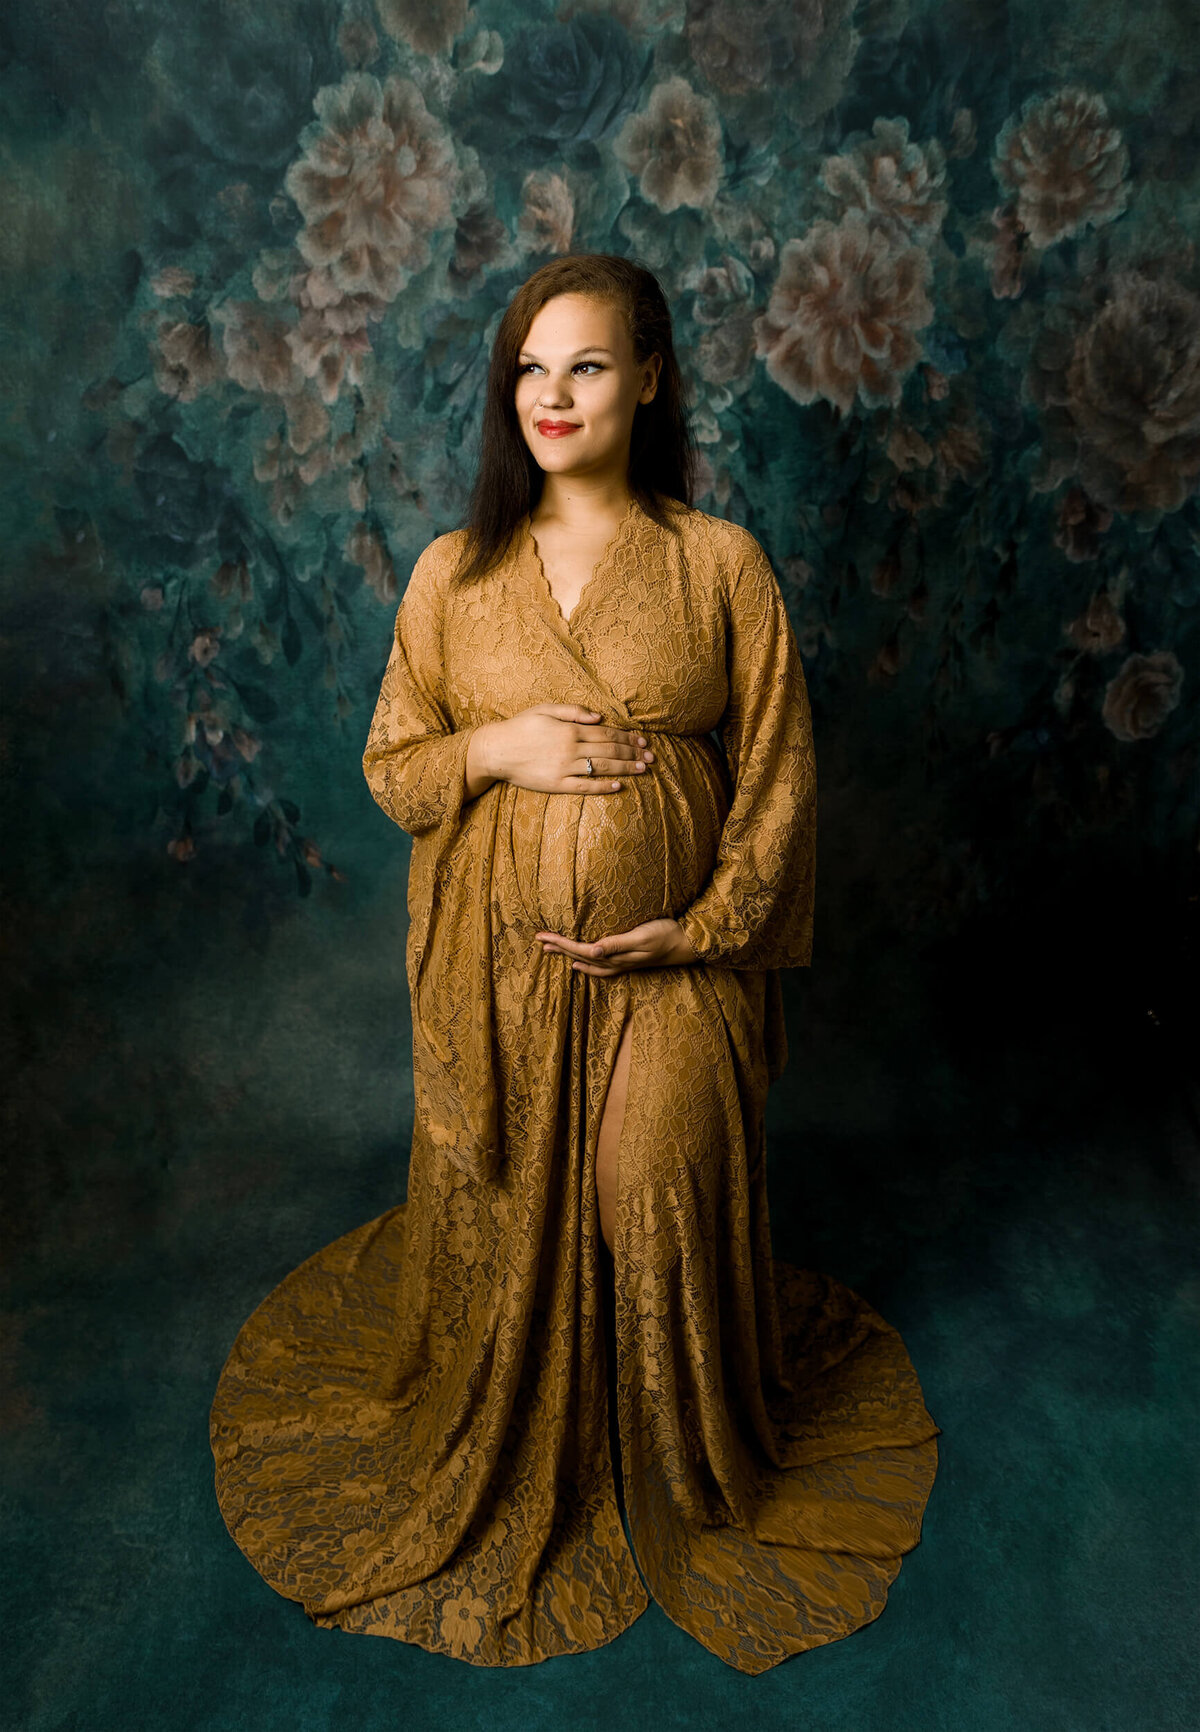 Young mother in a maternity gown posing in an Erie Pa photography studio